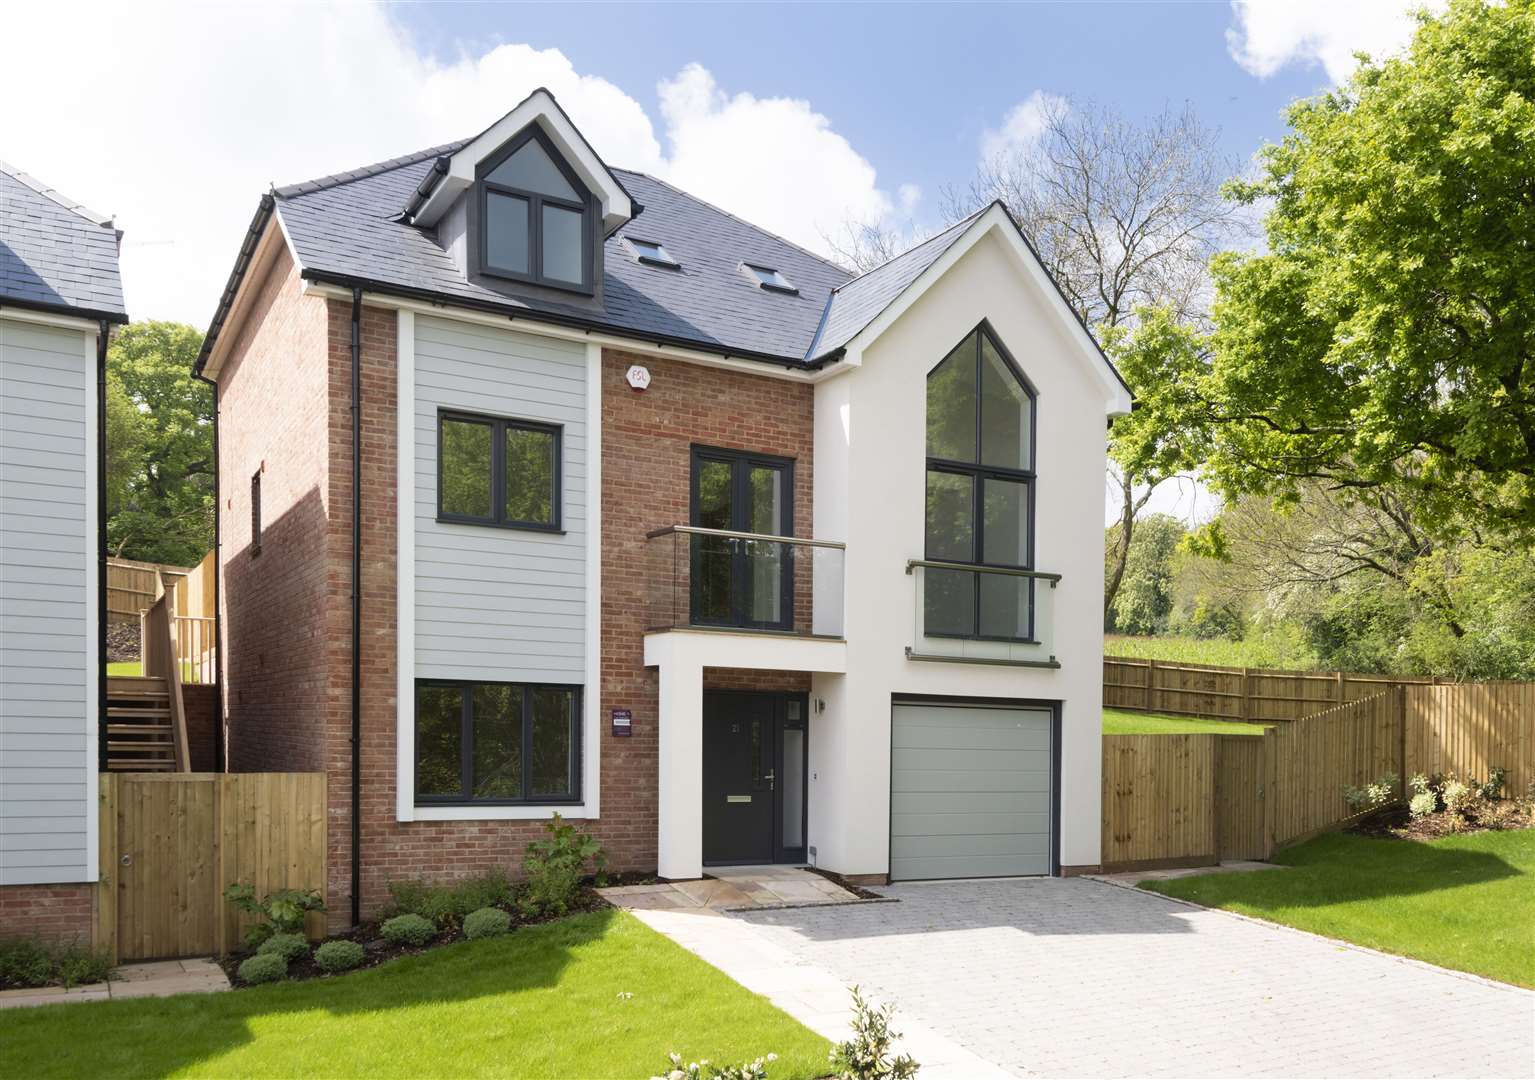 A 'contemporary' design by Fernham Homes at Downsview in Westerham